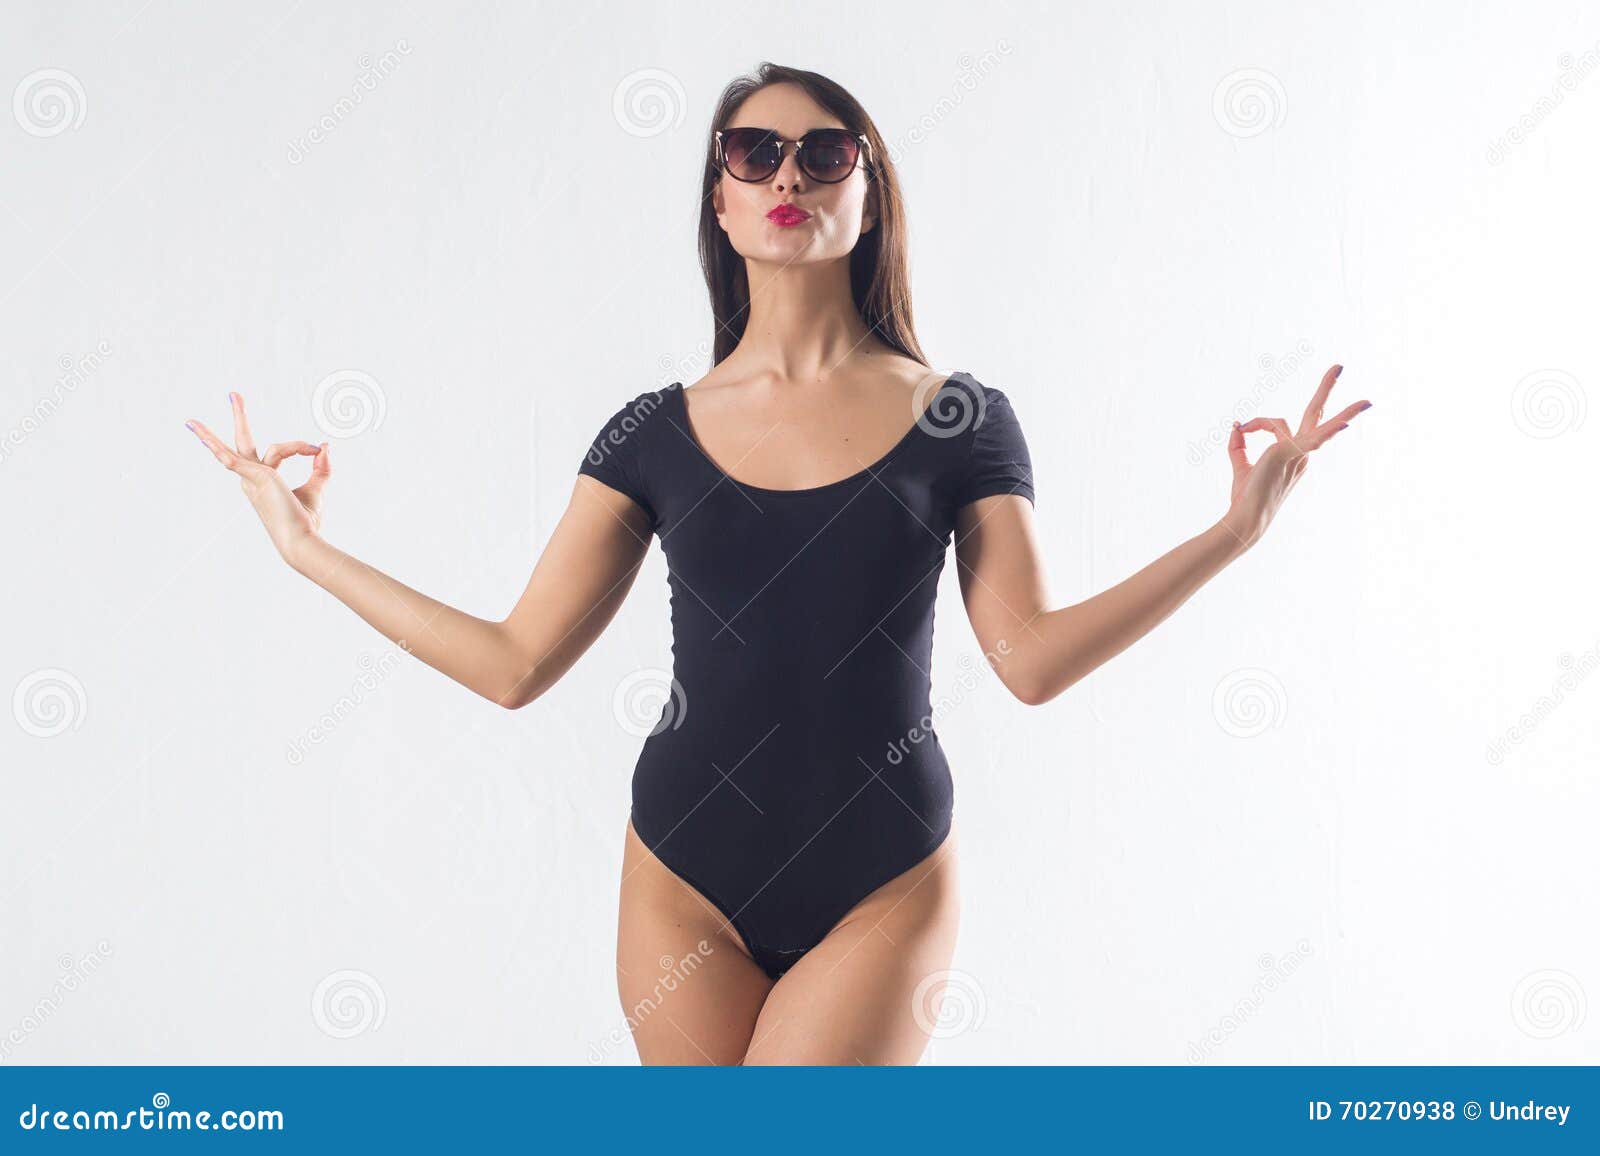 pretty brunette with long hair, wearing black one piece swimwear, holding hands aside, imitating meditation, making duck